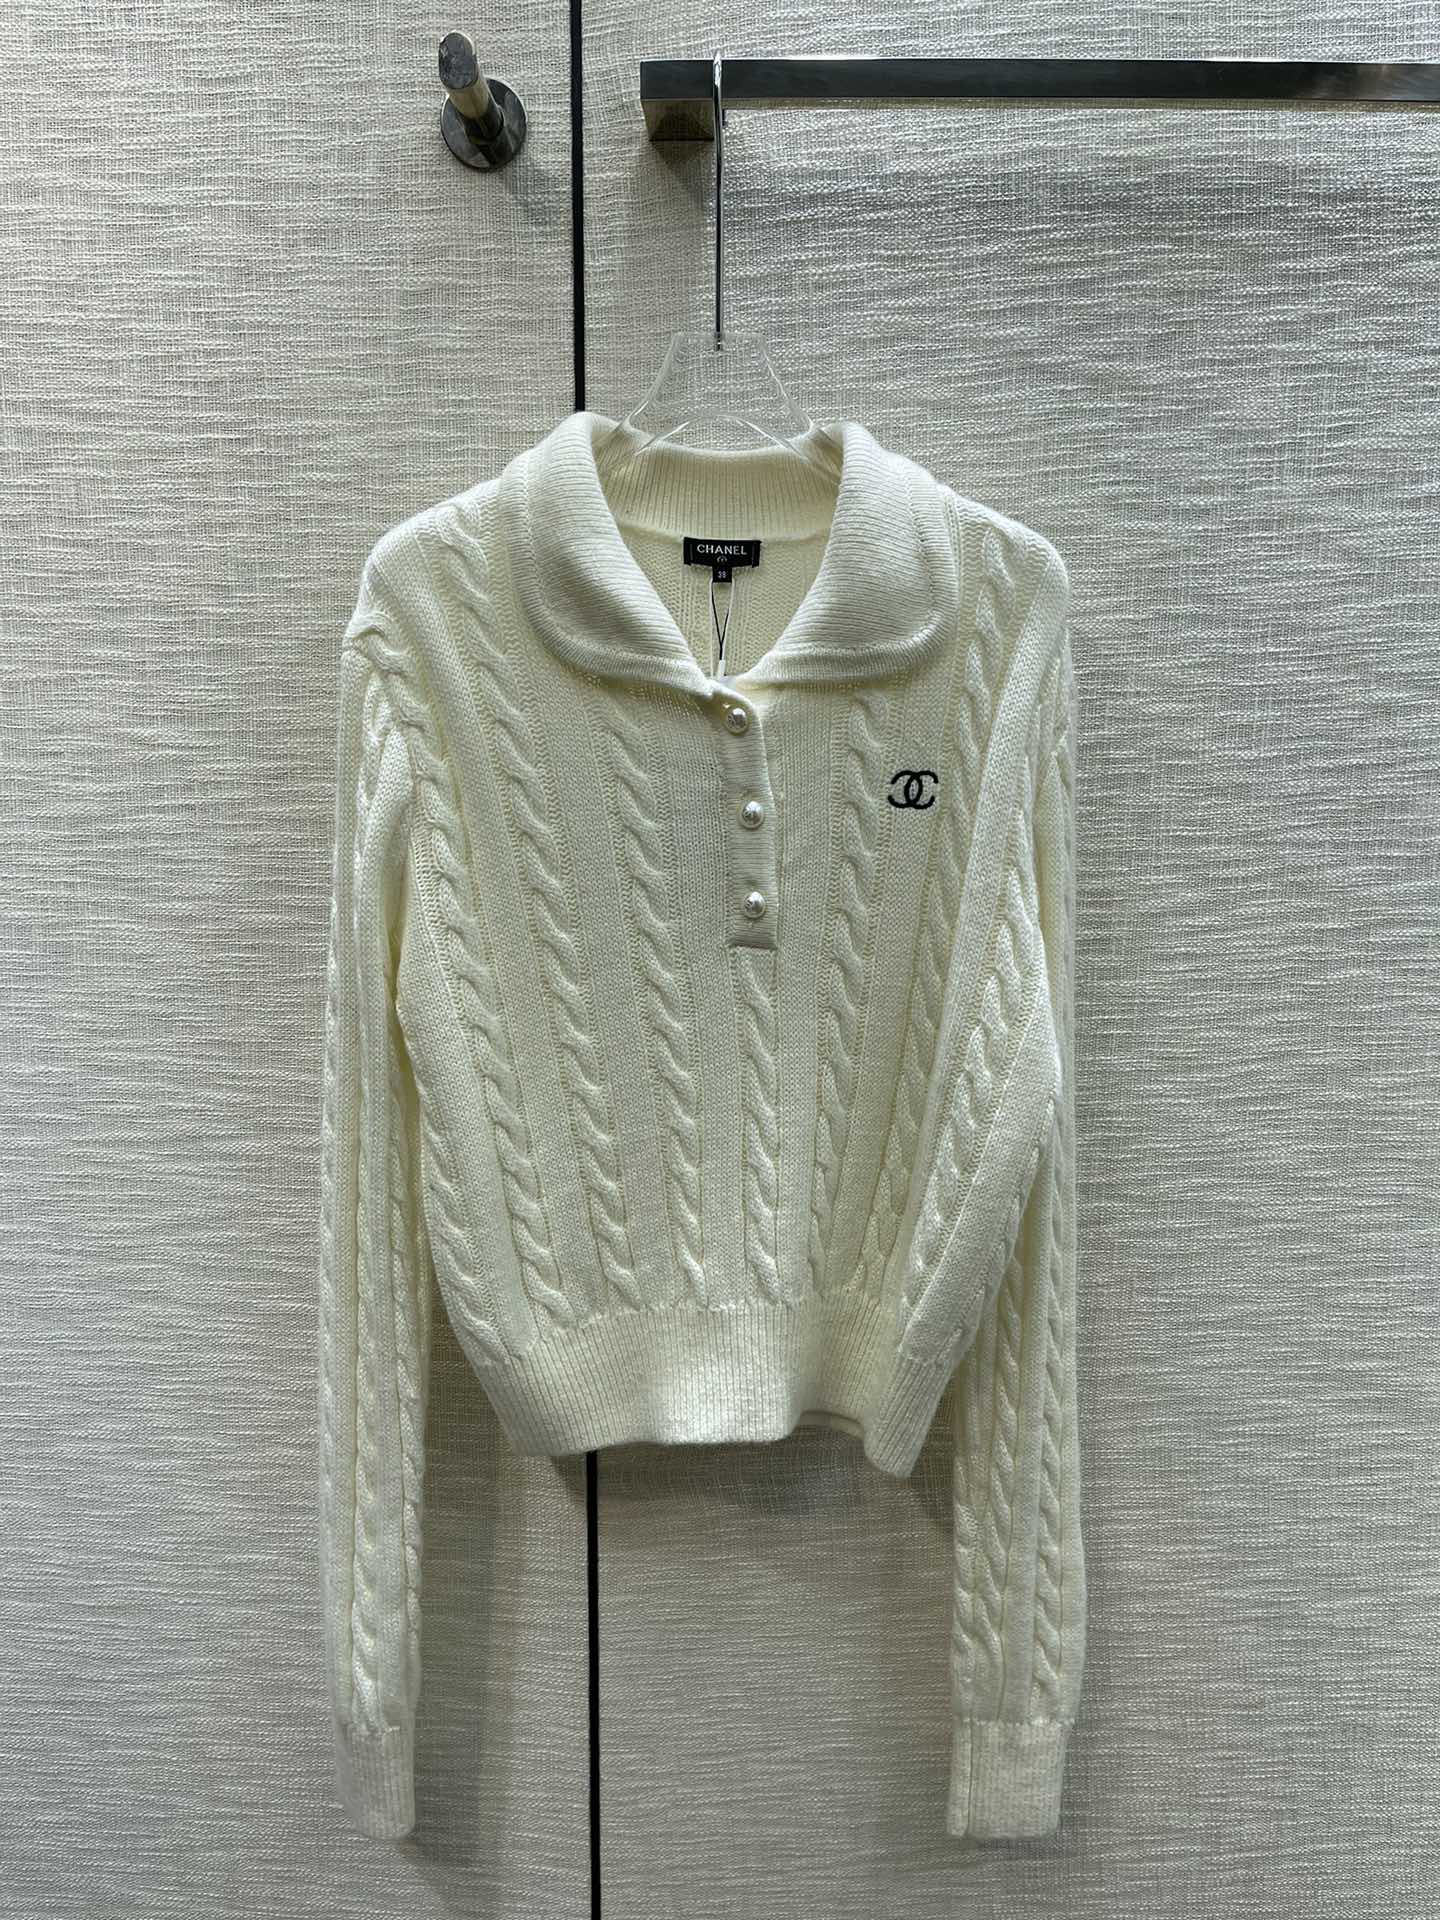 Chanel Clothing Knit Sweater Sweatshirts White Embroidery Knitting Wool Fall/Winter Collection Casual